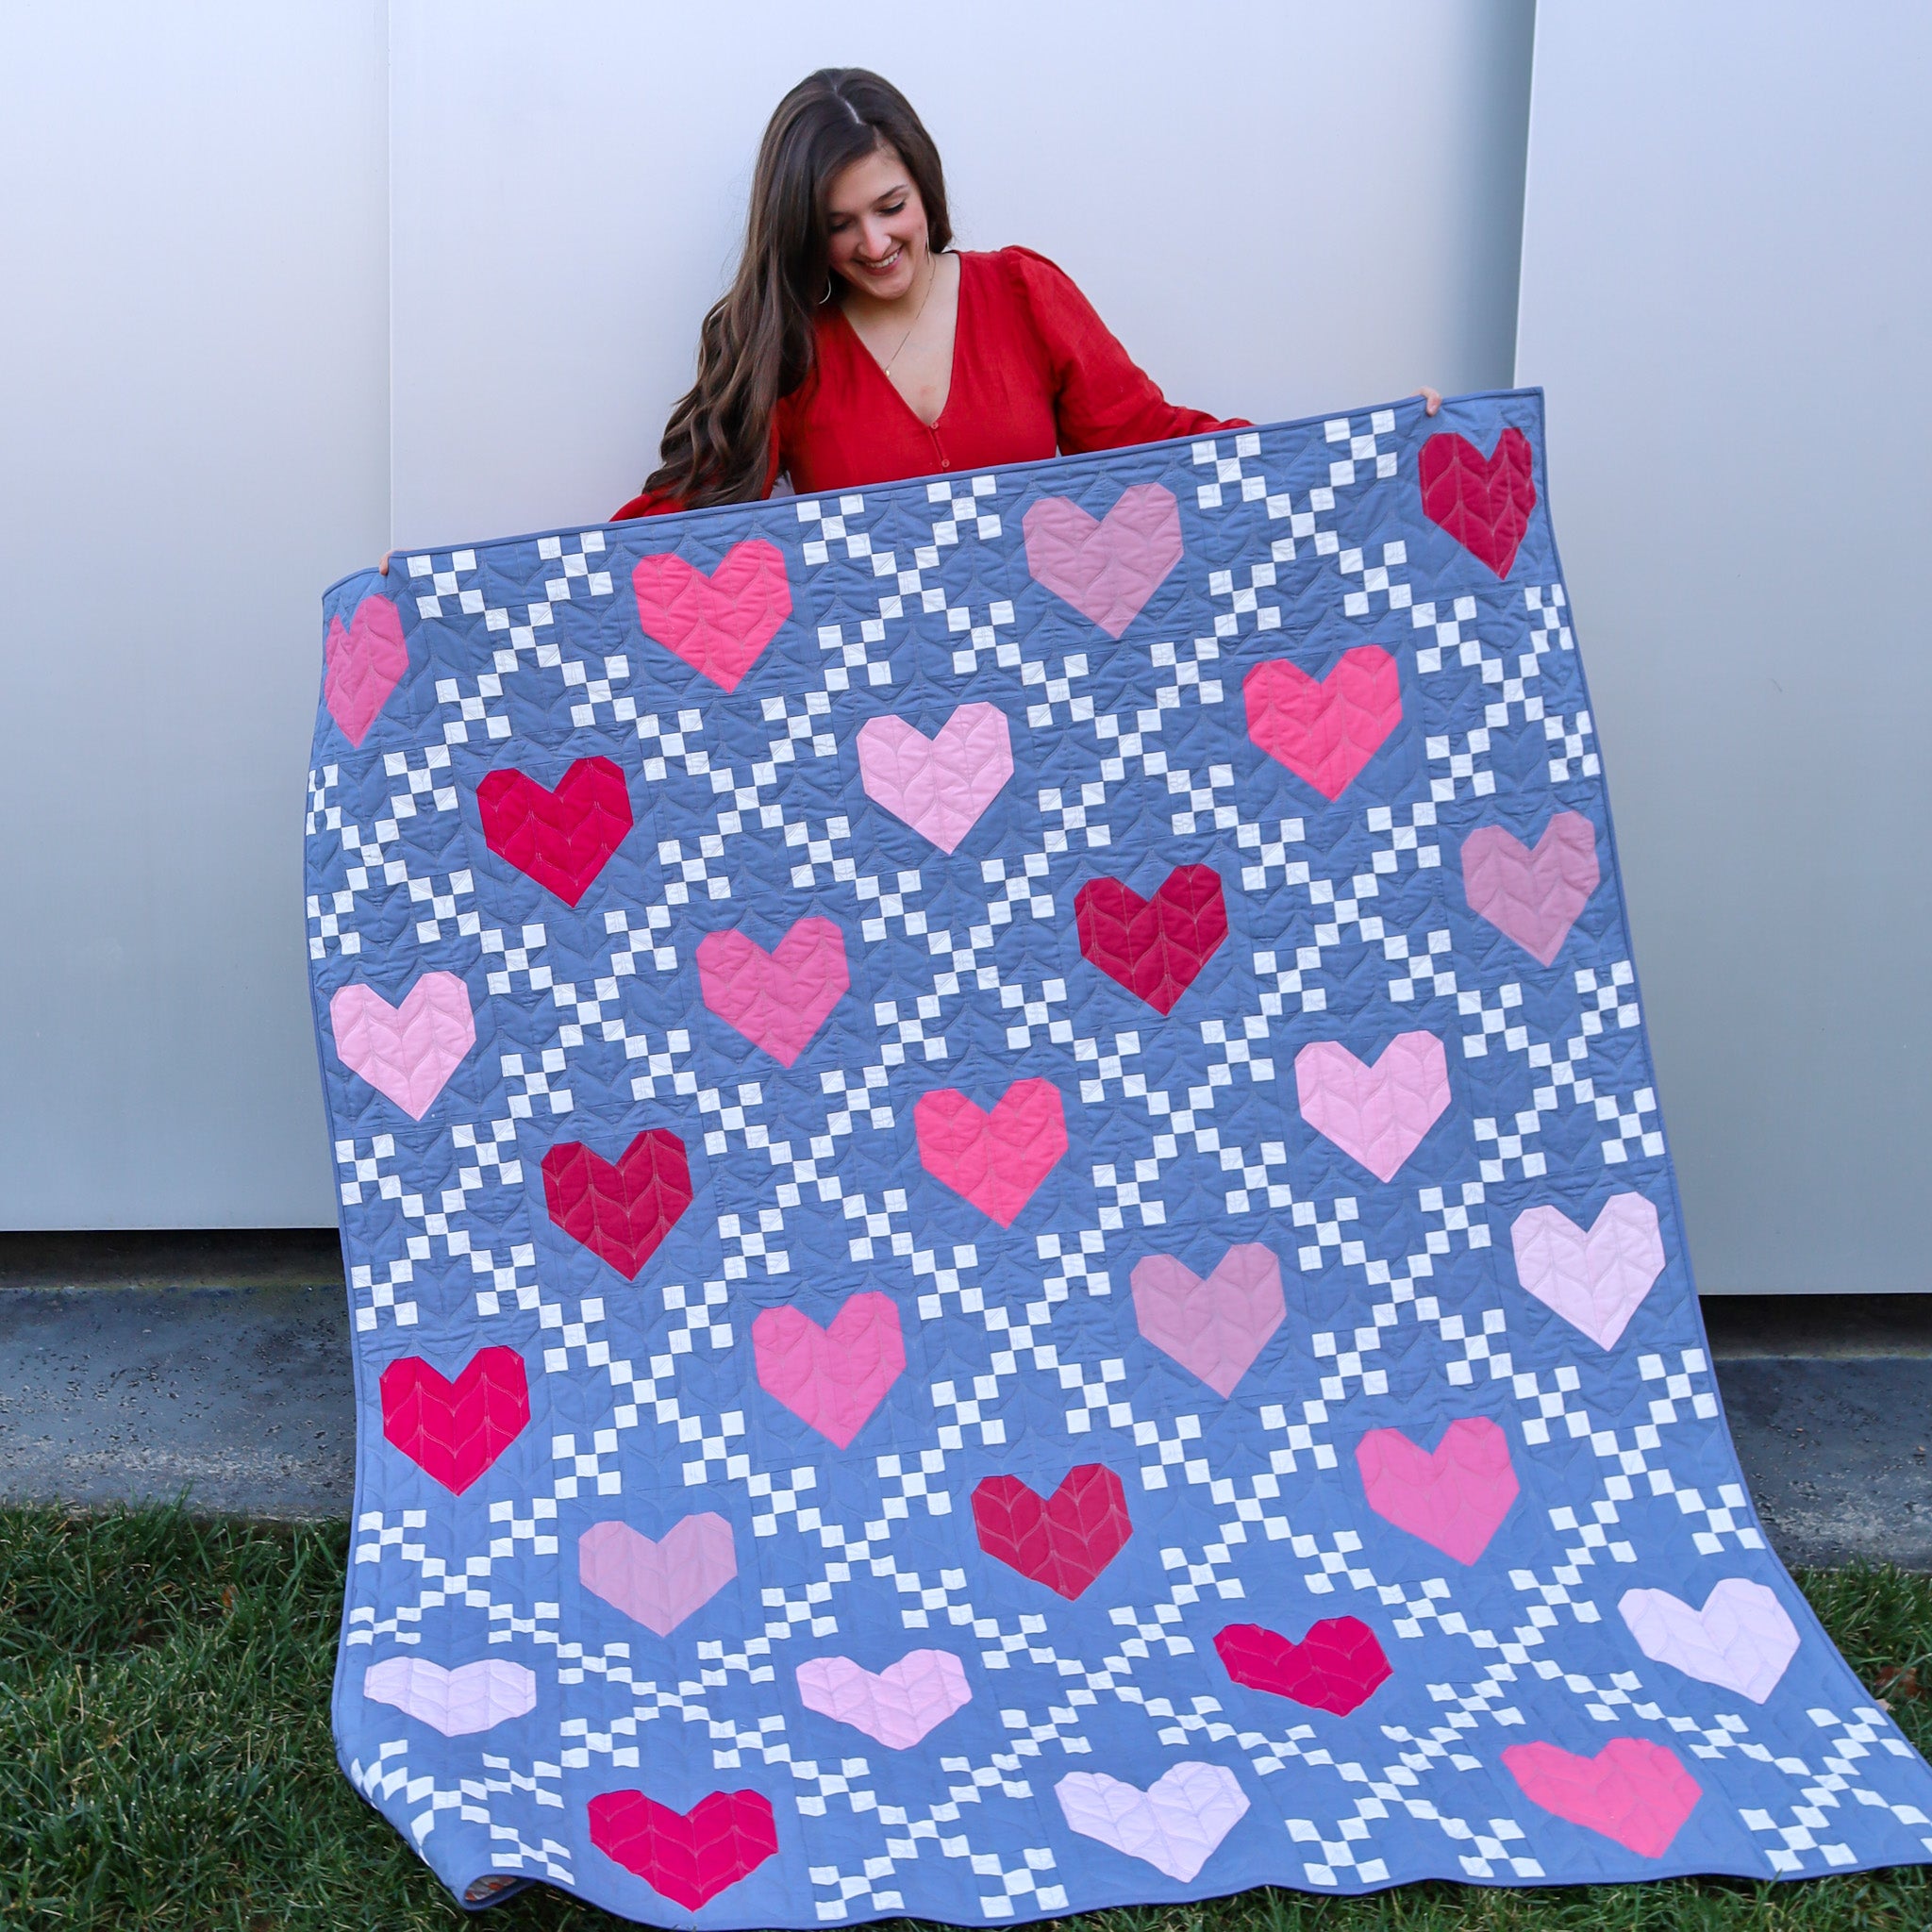 Heirloom Hearts Quilt Pattern - the Cover quilt